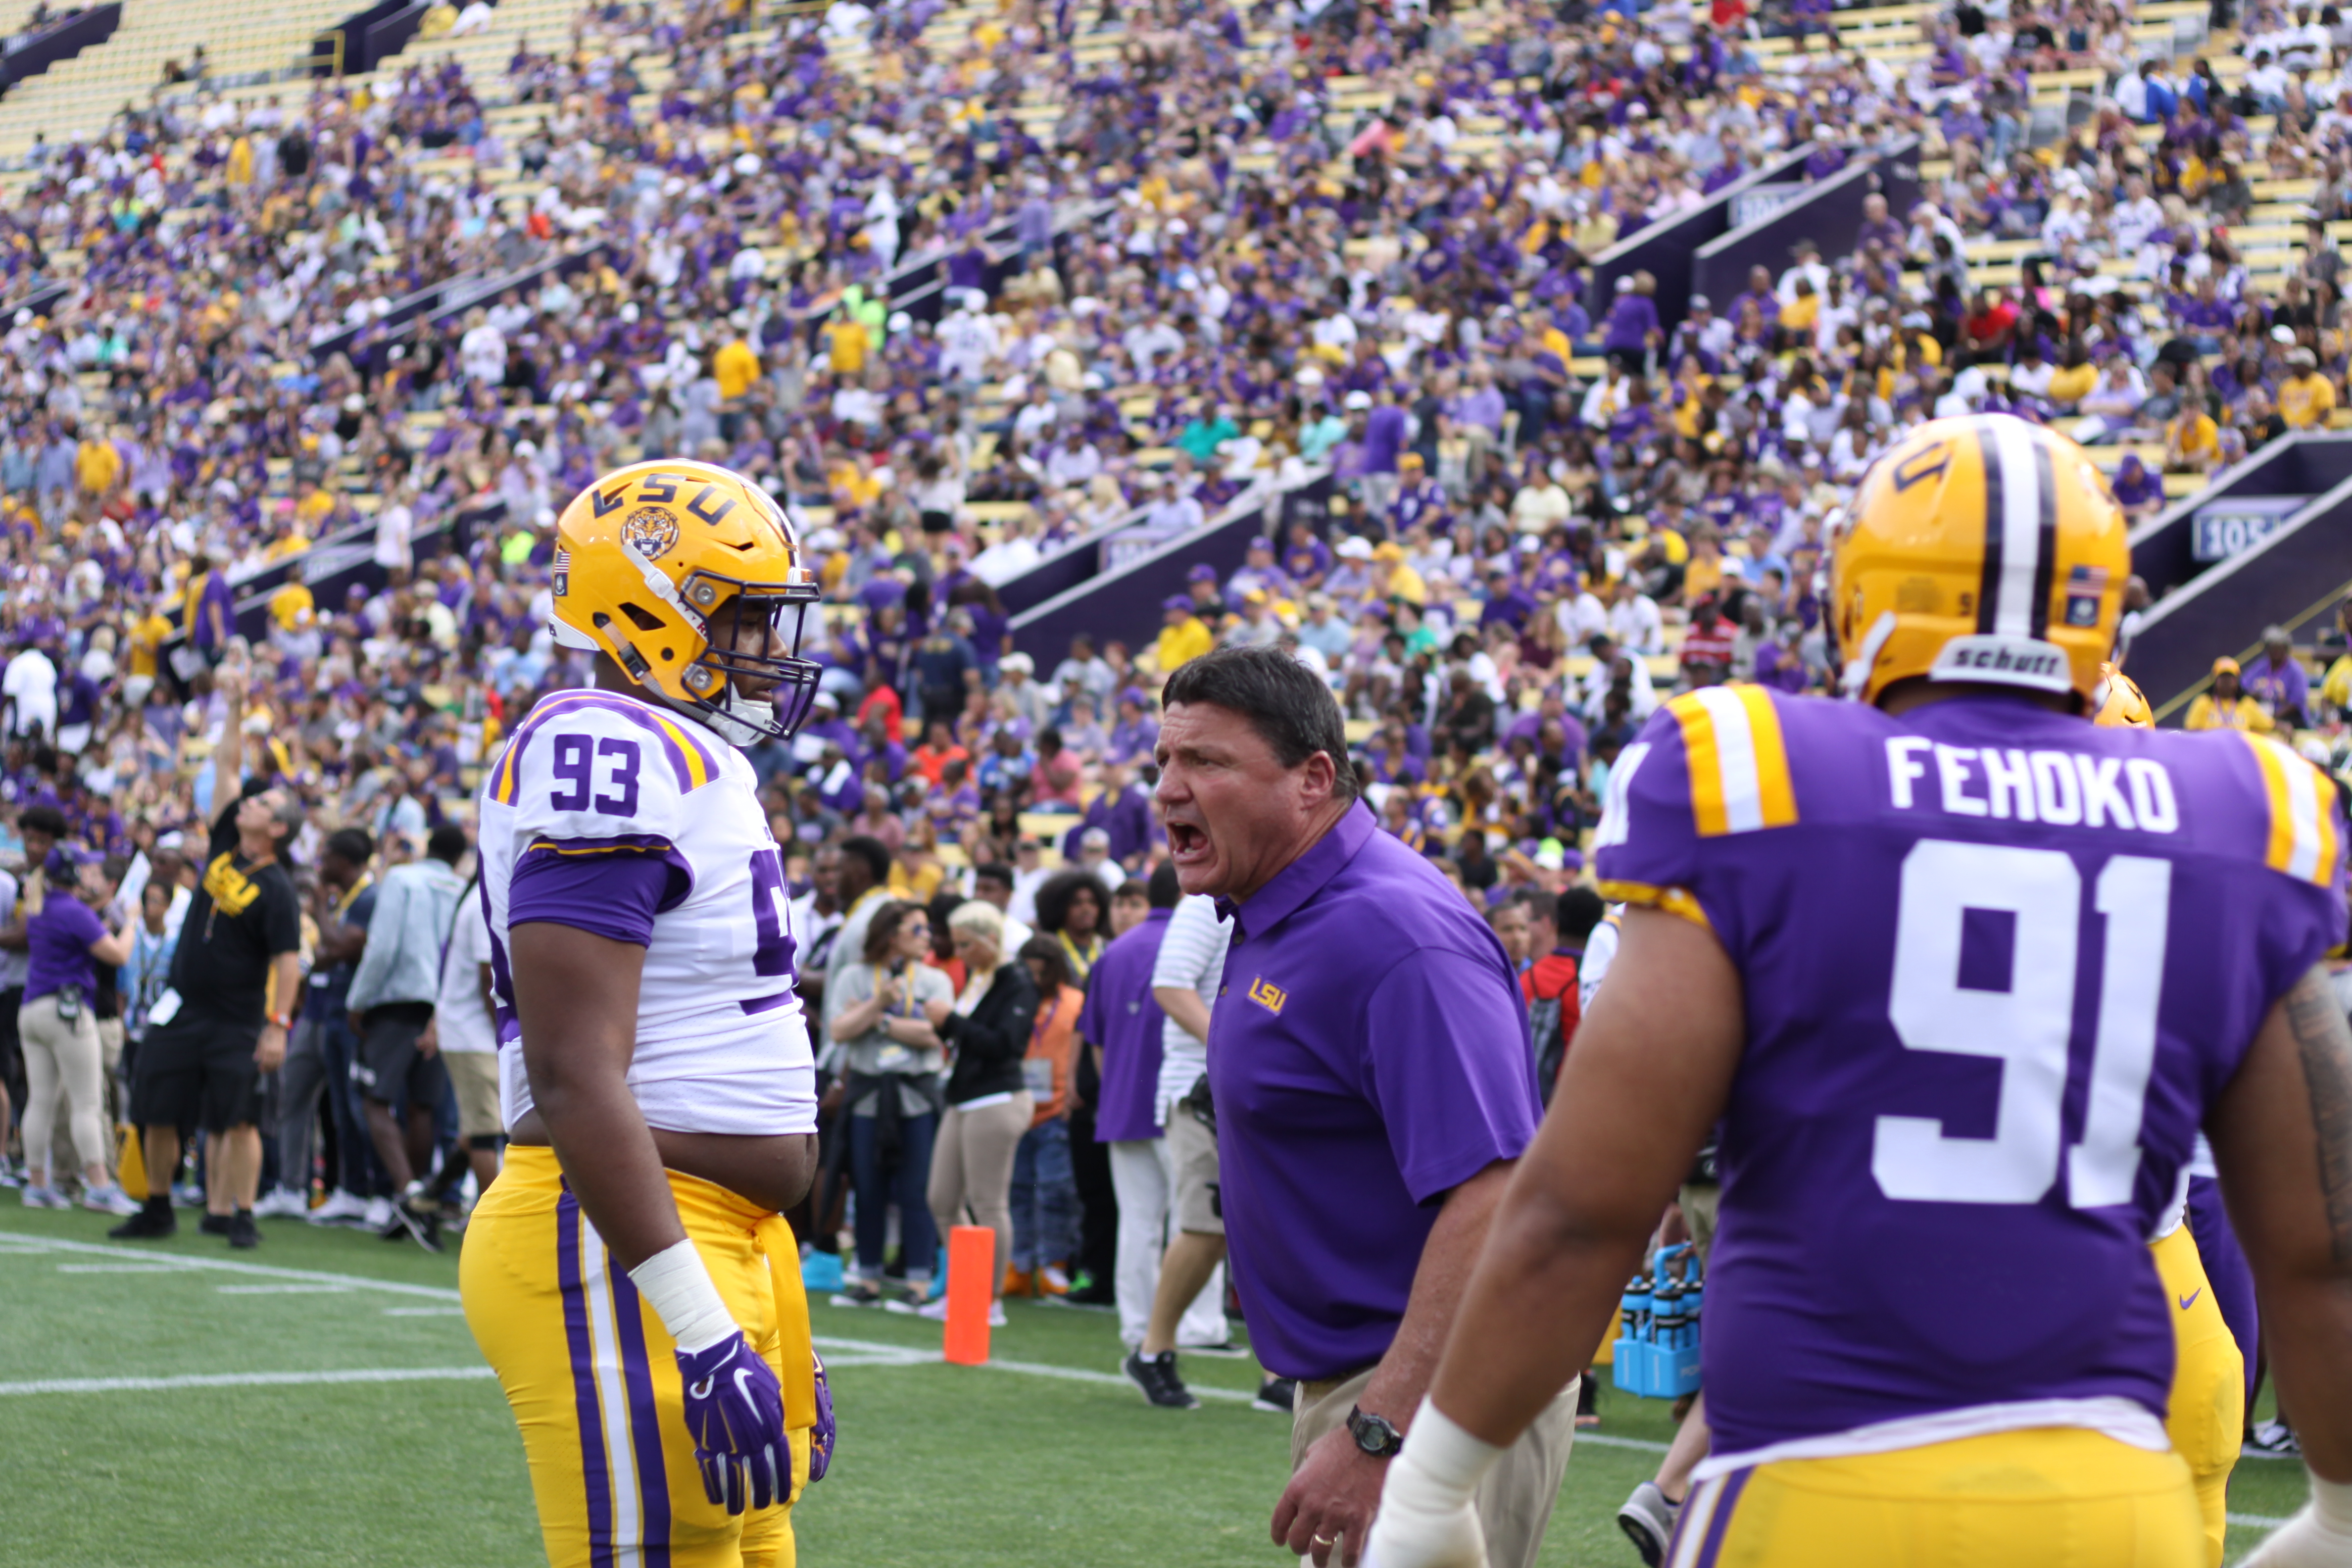 DEFENSE SHINES IN LSU’S FIRST SCRIMMAGE OF TRAINING CAMP